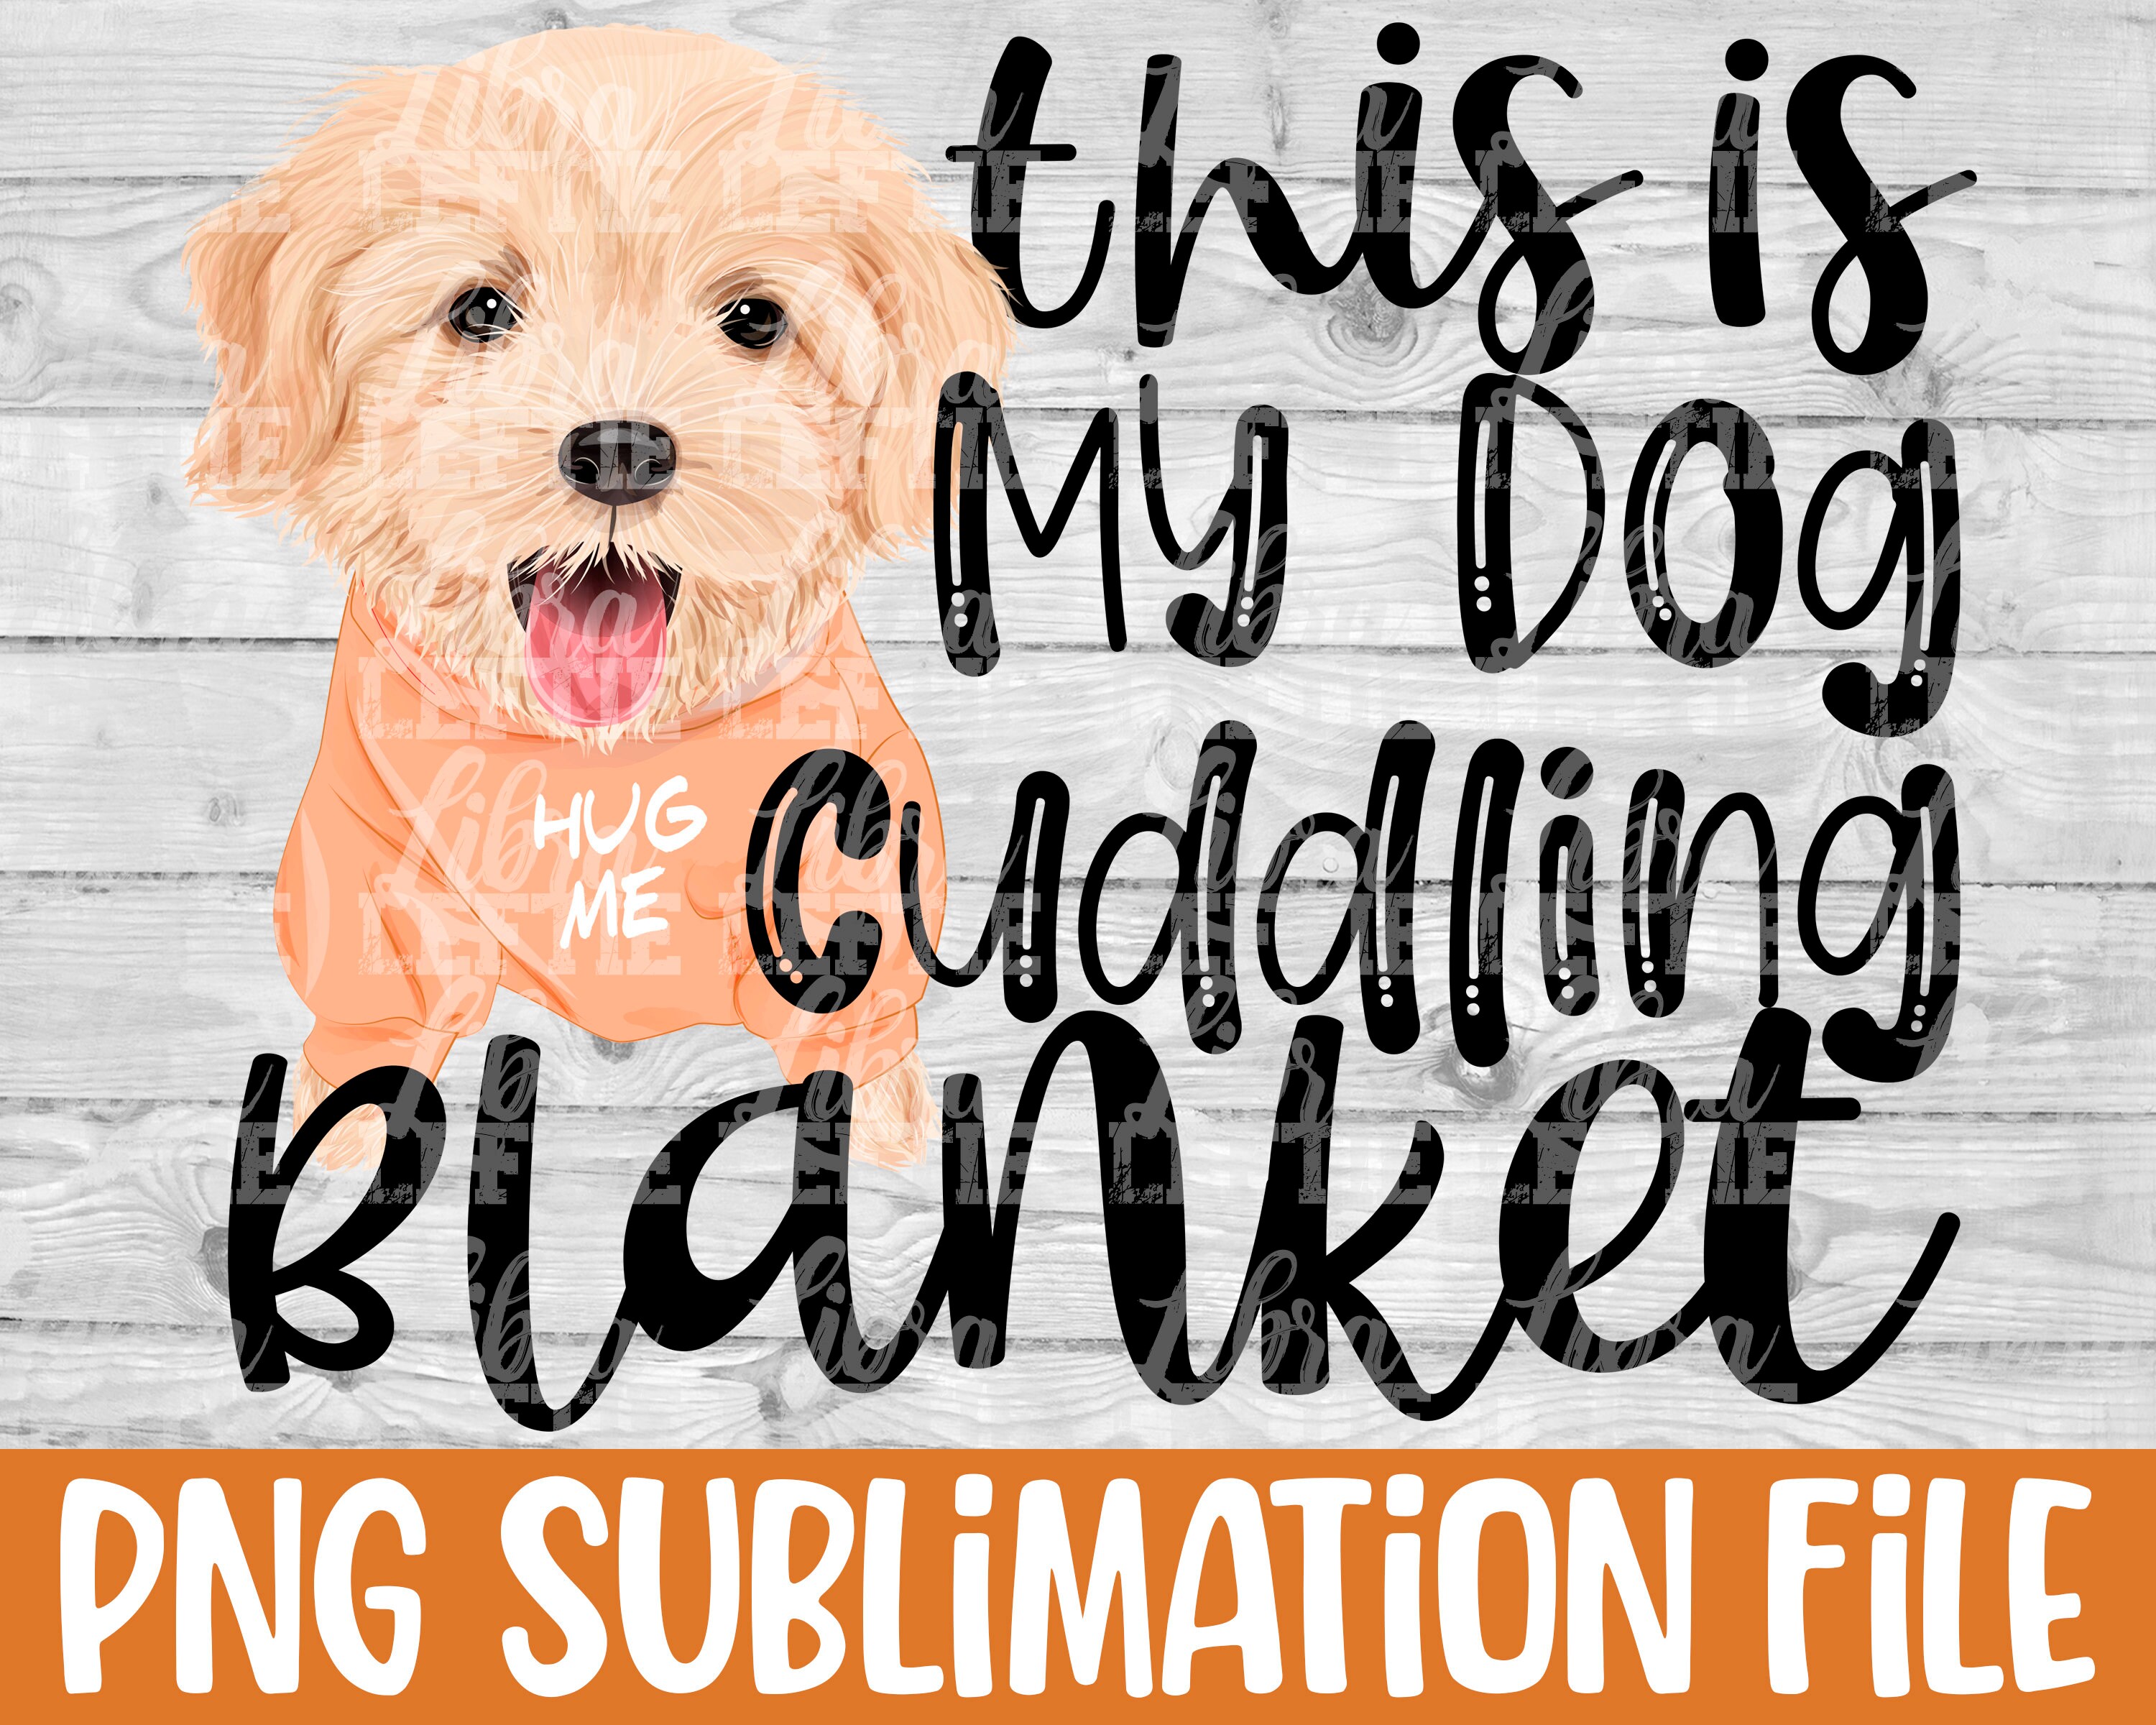 My Cuddle Movie Watching Blanket Sublimation Png File 